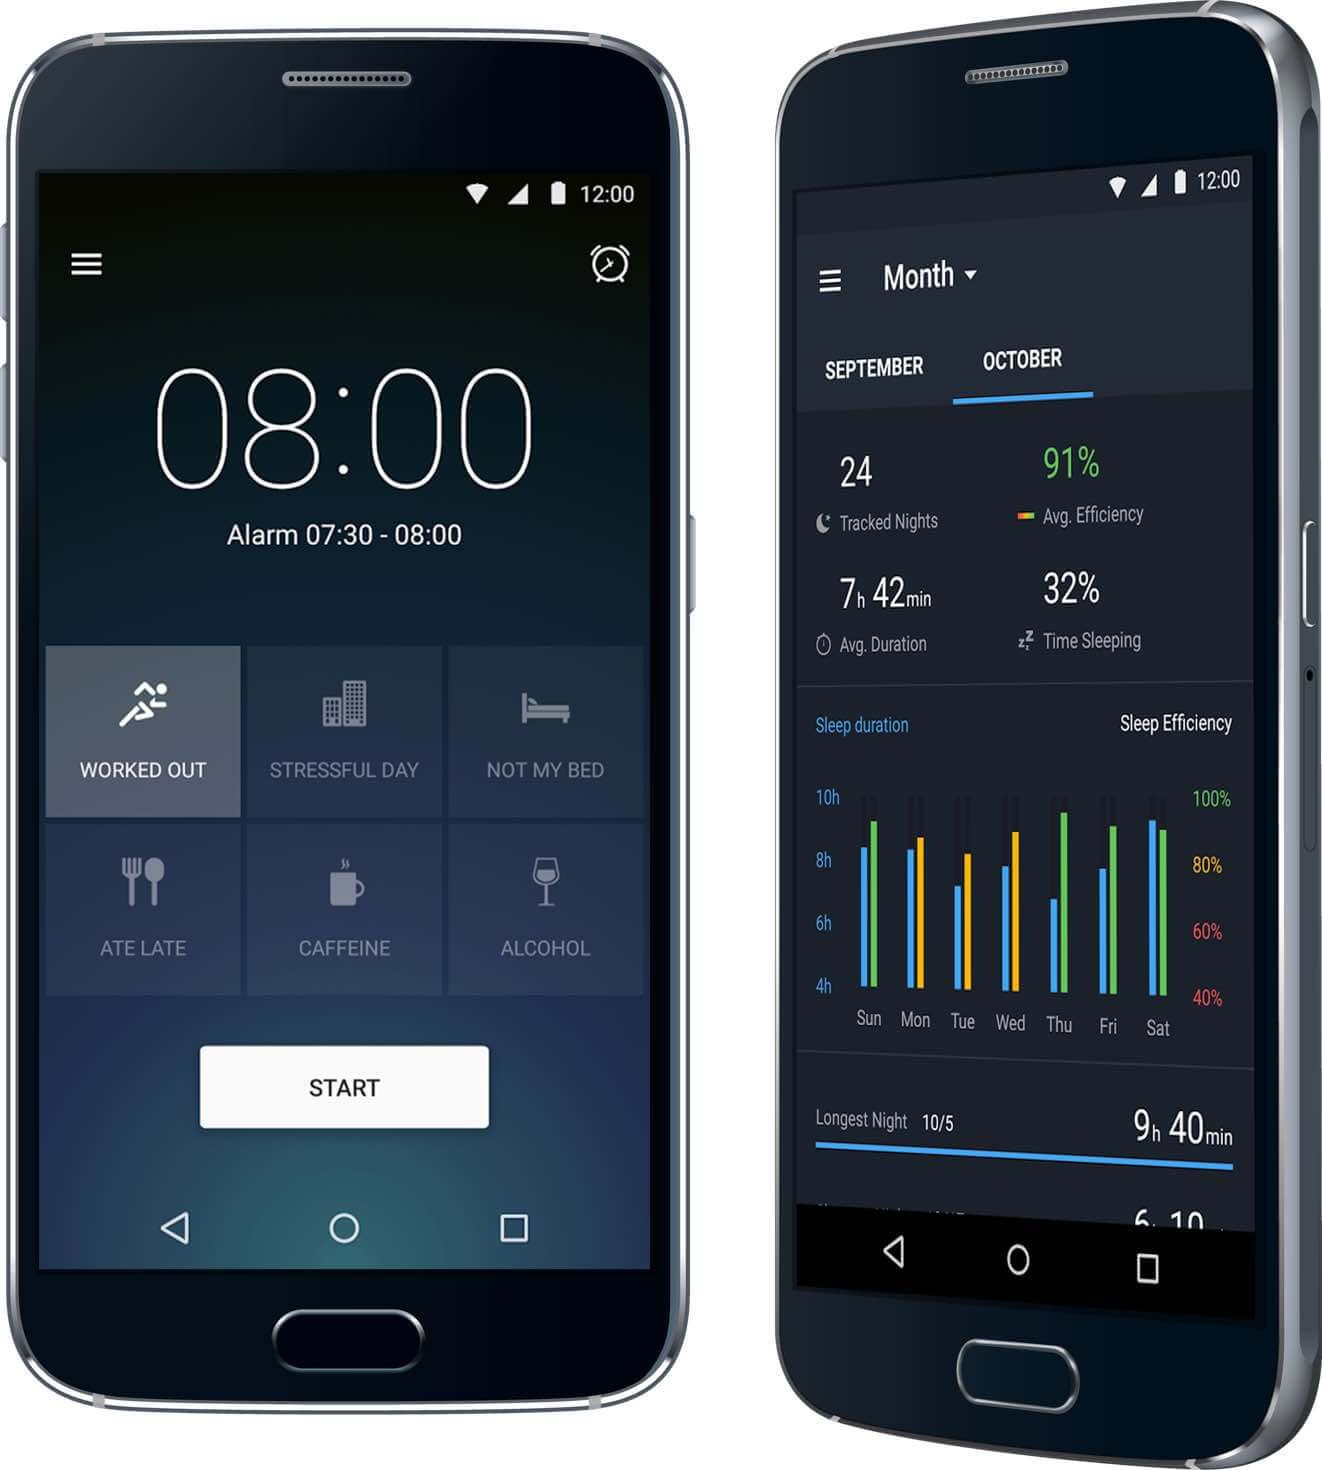 Two Android phones showing the home screen of the app and the statistics screen